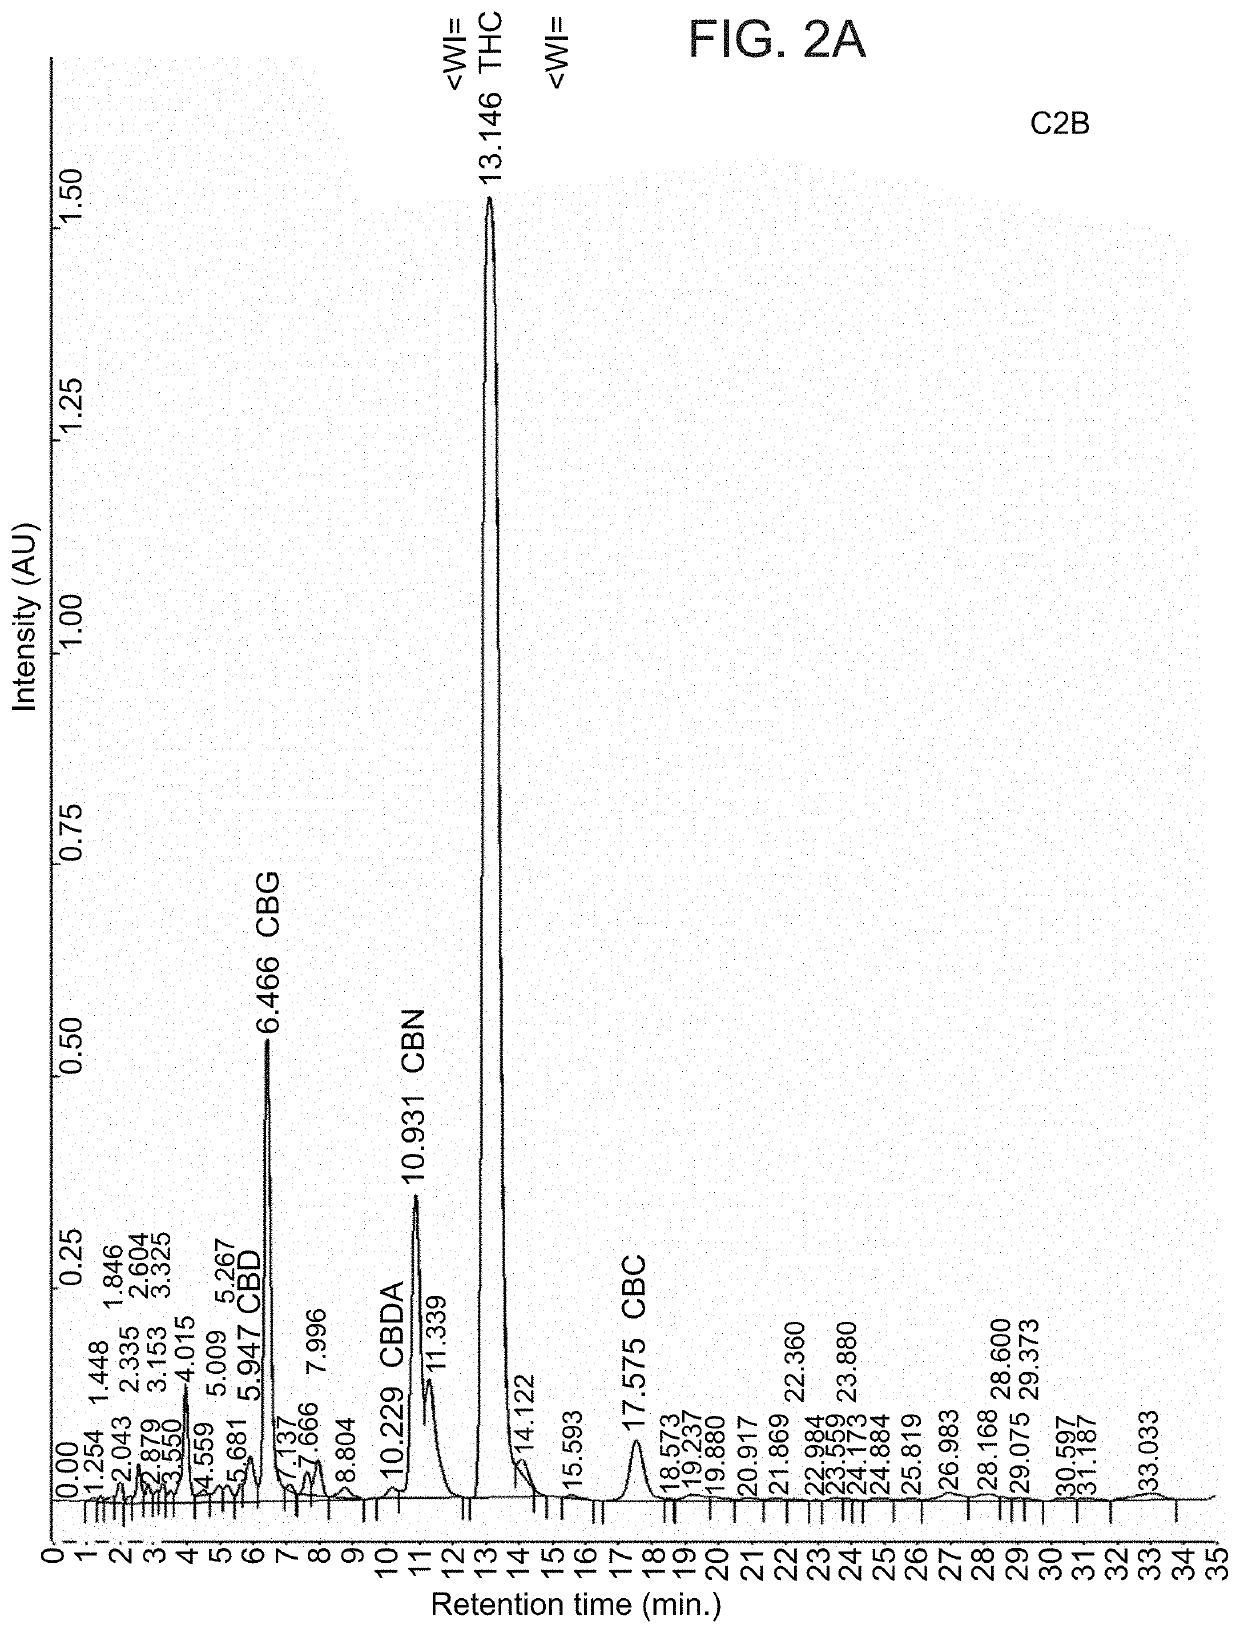 Compositions and methods for treating cancer